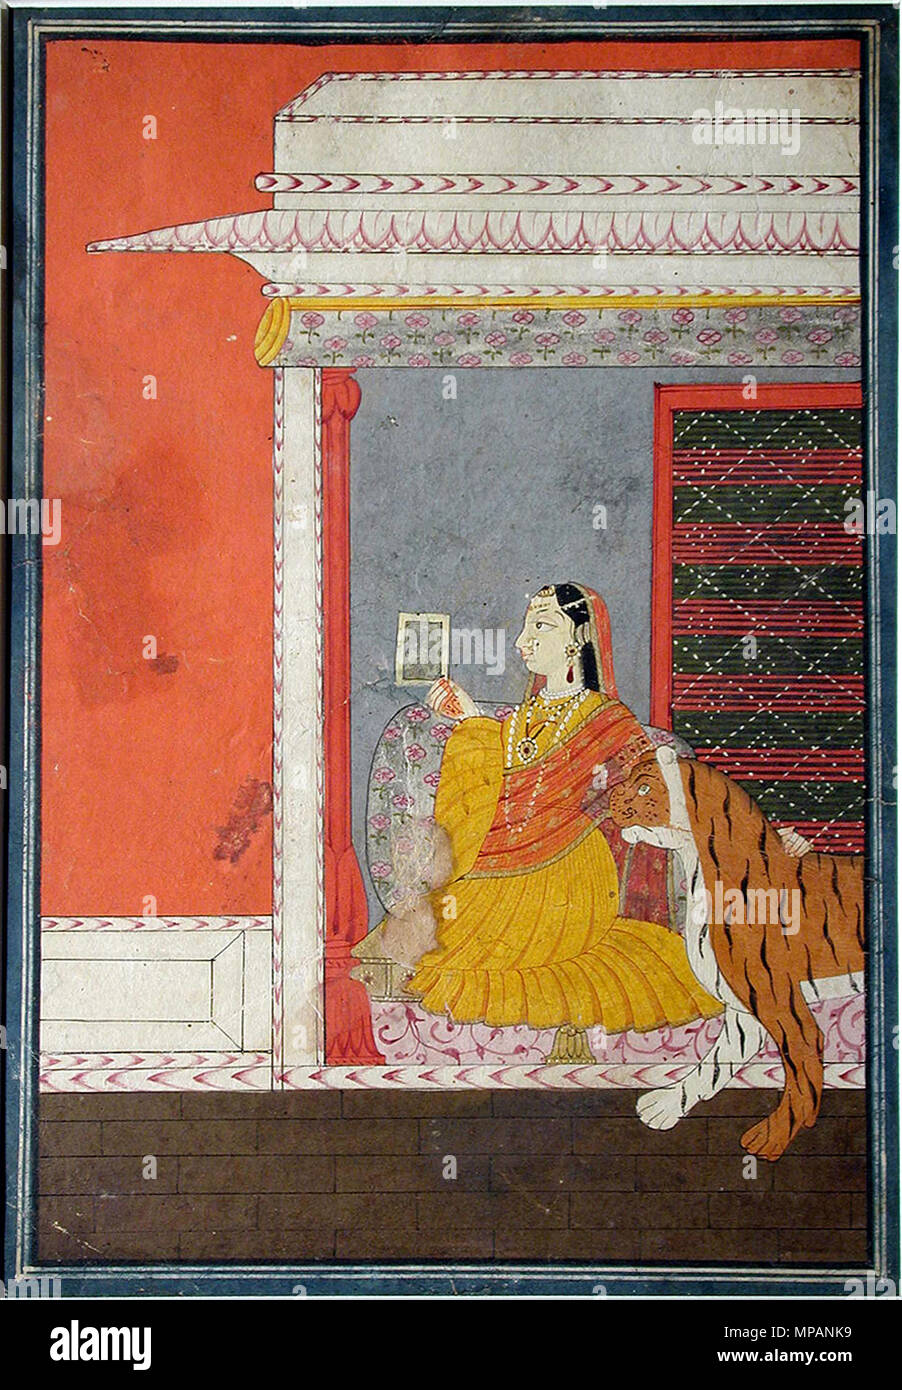 . English: Series Title: Ragamala Suite Name: Ragamala Creation Date: ca. 1790 Display Dimensions: 9 31/32 in. x 7 1/16 in. (25.3 cm x 17.9 cm) Credit Line: Edwin Binney 3rd Collection Accession Number: 1990.1115 Collection: <a href='http://www.sdmart.org/art/our-collection/asian-art' rel='nofollow'>The San Diego Museum of Art</a> . 15 October 2001, 11:07:10. English: thesandiegomuseumofartcollection 1136 Srihathi Ragini (6125125250) Stock Photo